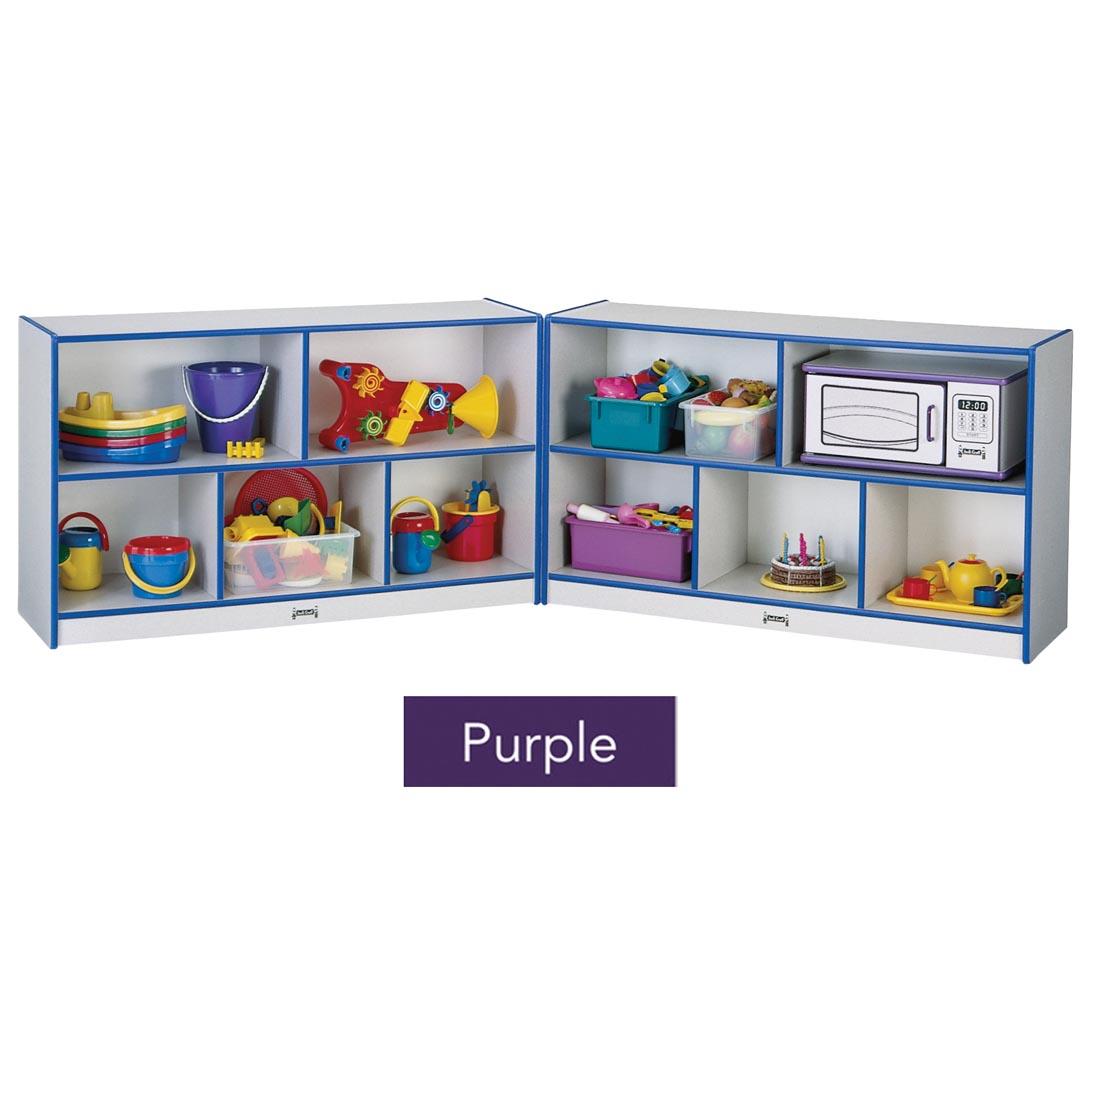 Colored Edge Fold-n-Lock Low Shelving shown with suggested storage contents; text overlay of Purple